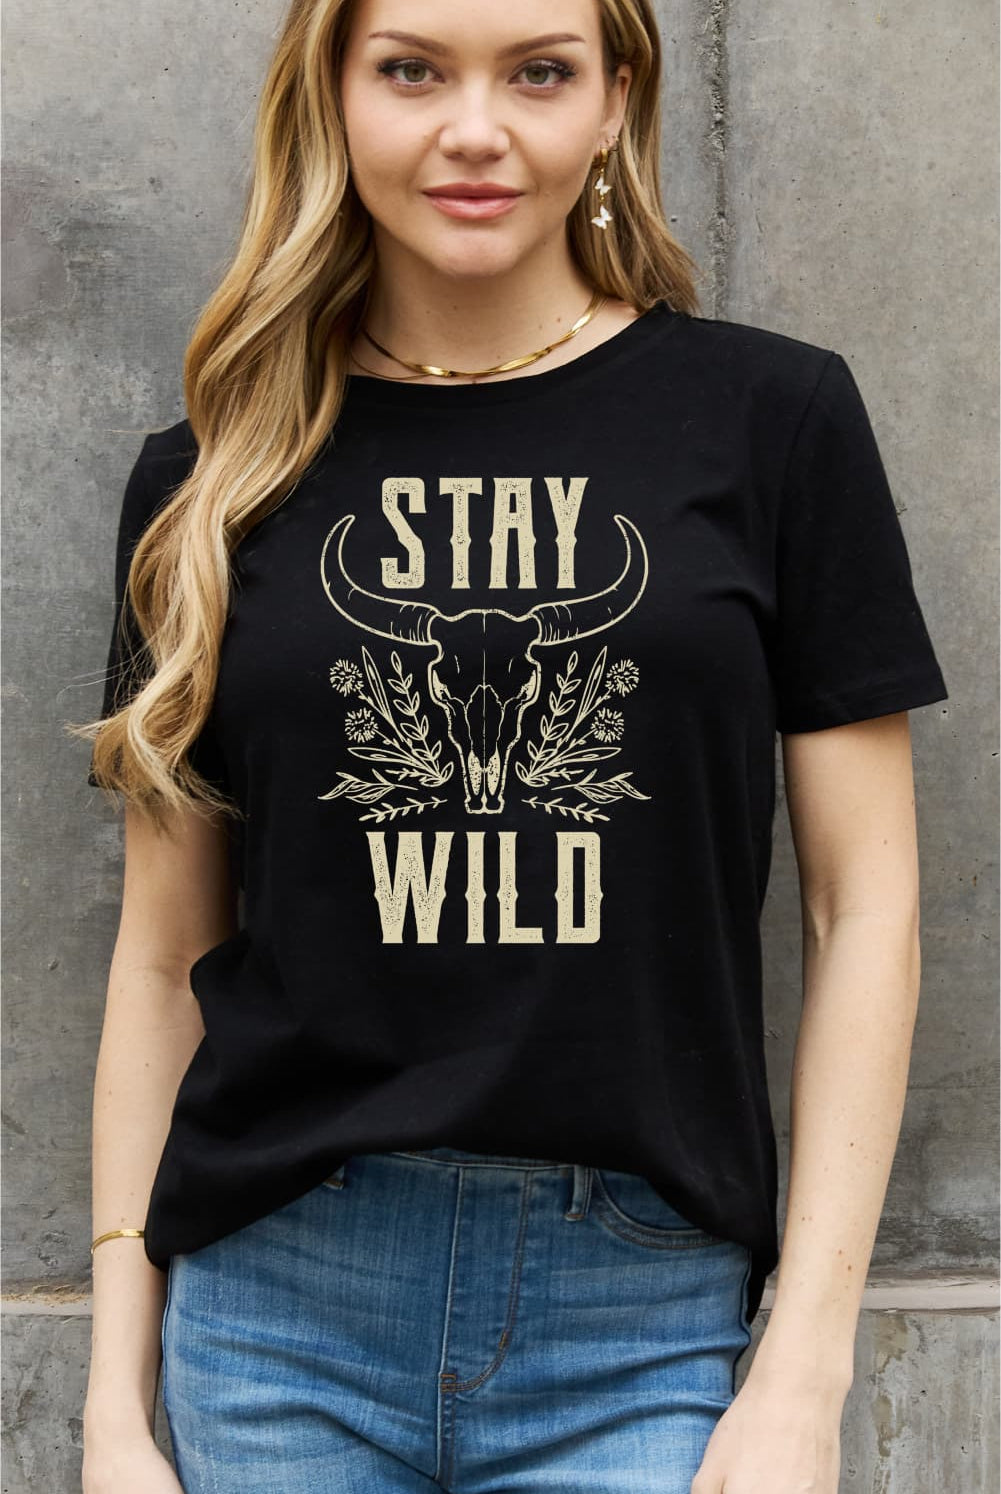 Dark Slate Gray Simply Love Full Size STAY WILD Graphic Cotton Tee Tops